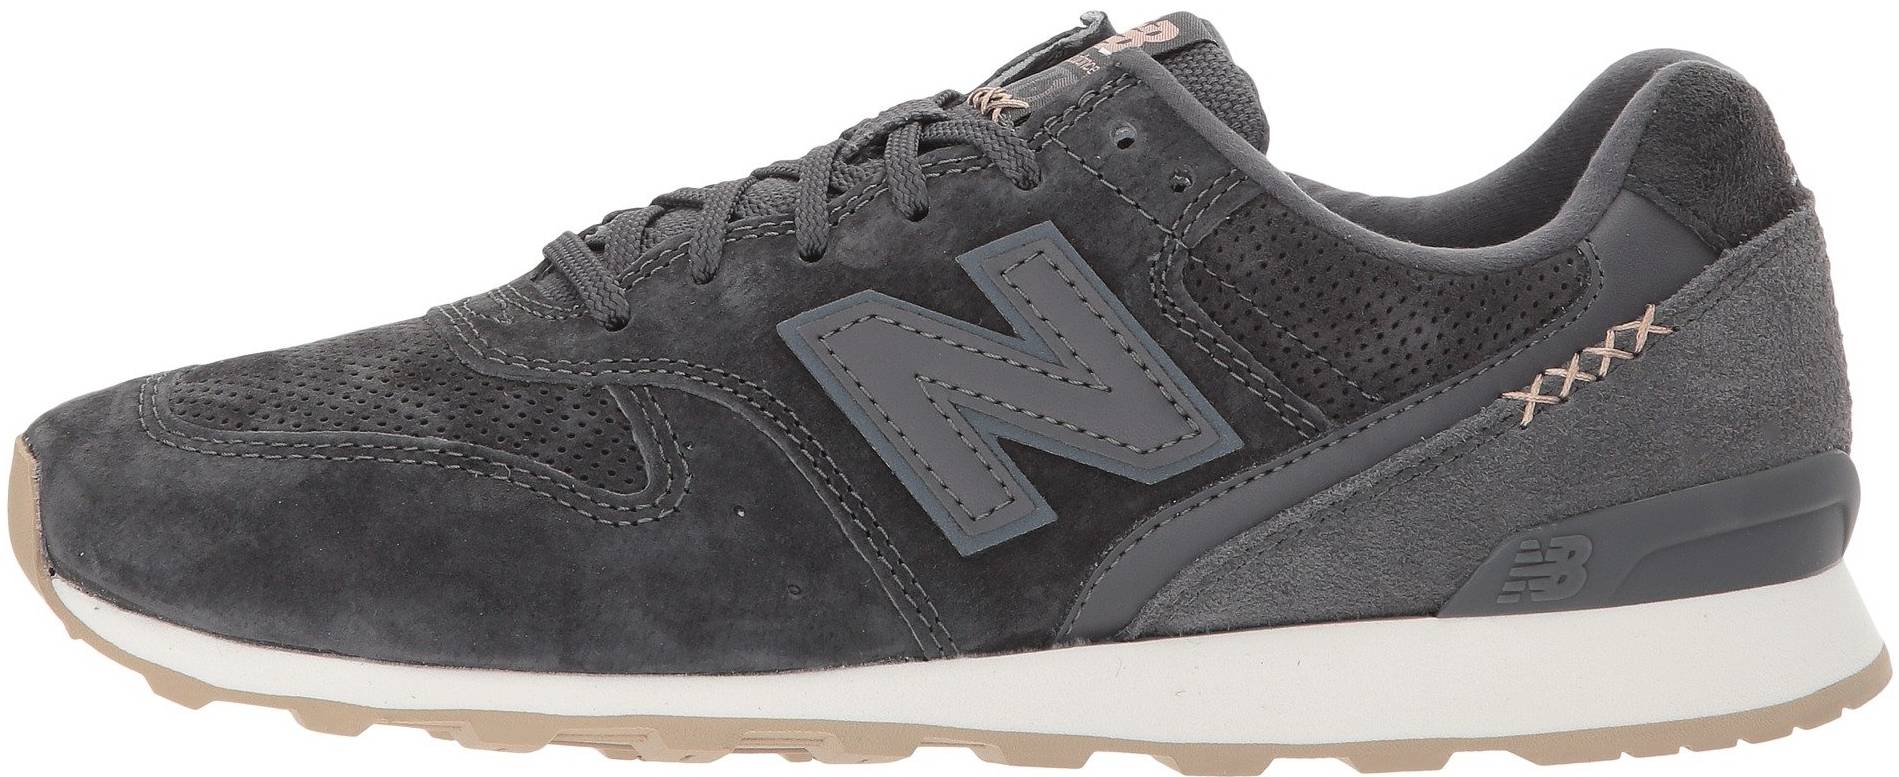 Only $48 + Review of New Balance 696 